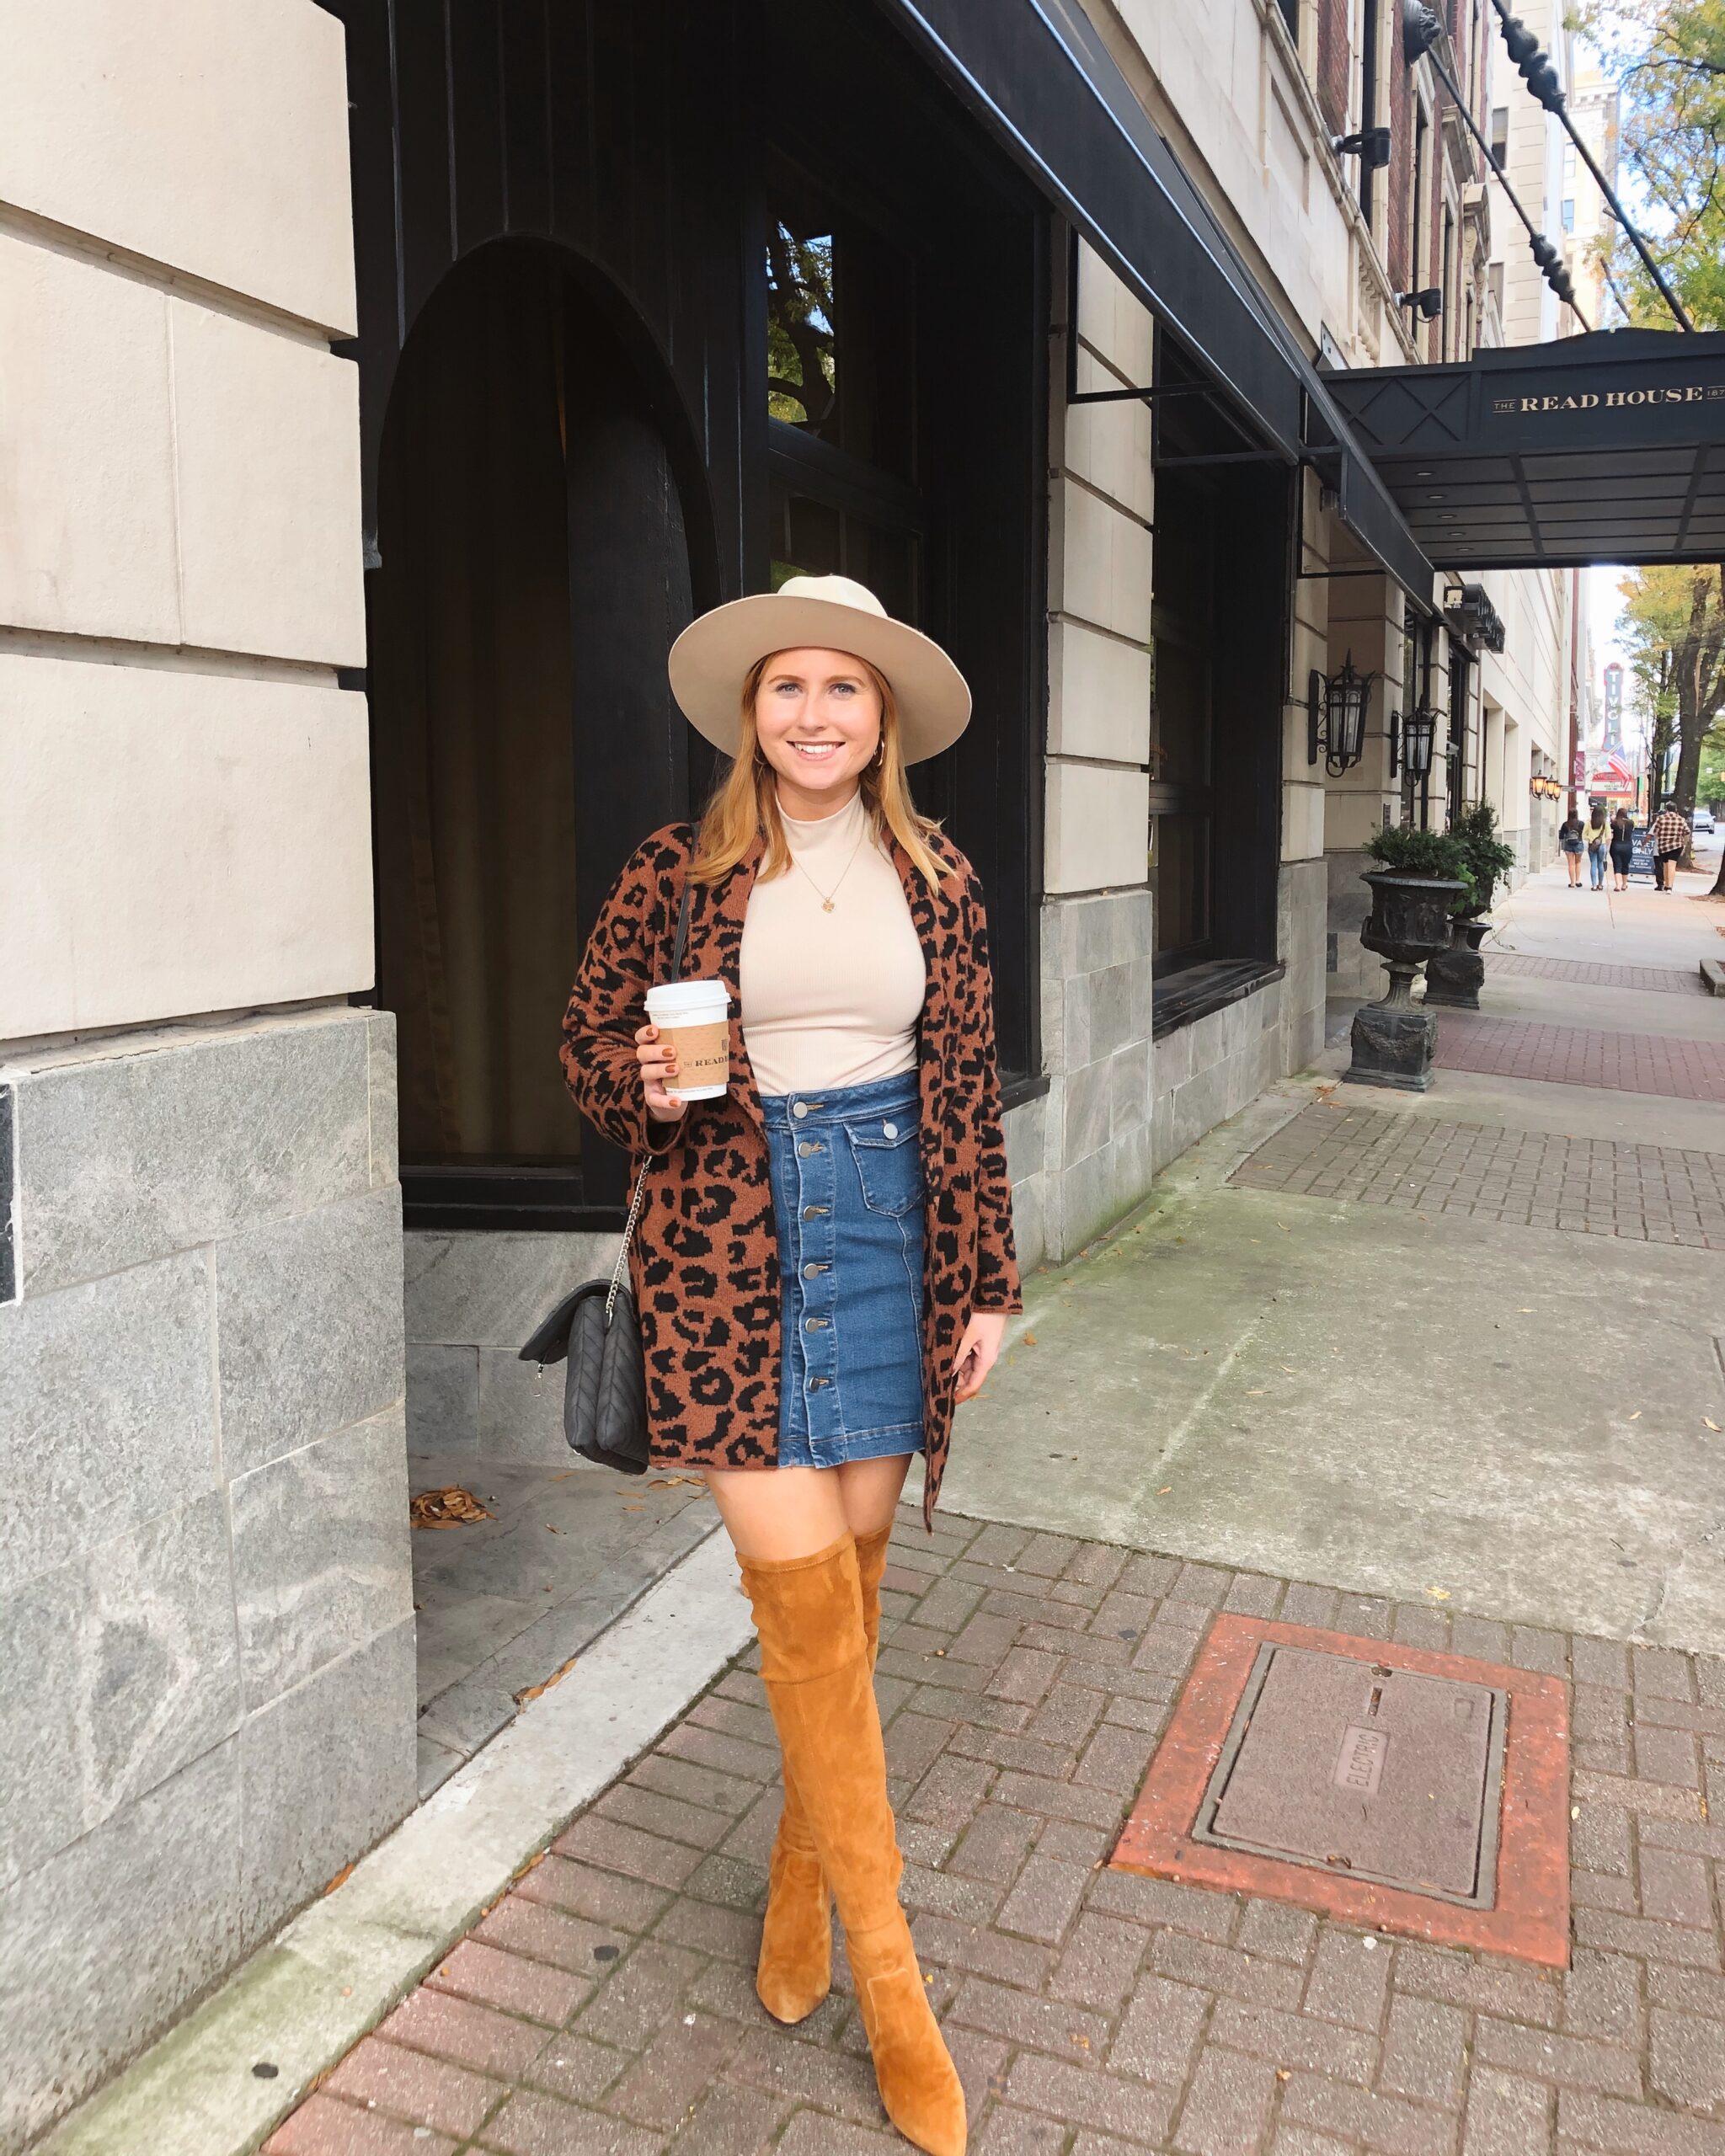 Time and Tru Women's Shawl Collar Cardigan Sweater - Walmart Fashion Finds. Affordable by Amanda wears denim mini skirt, brown suede boots, leopard cardigan and a tan hat at the Read House Hotel in Chattanooga, TN.